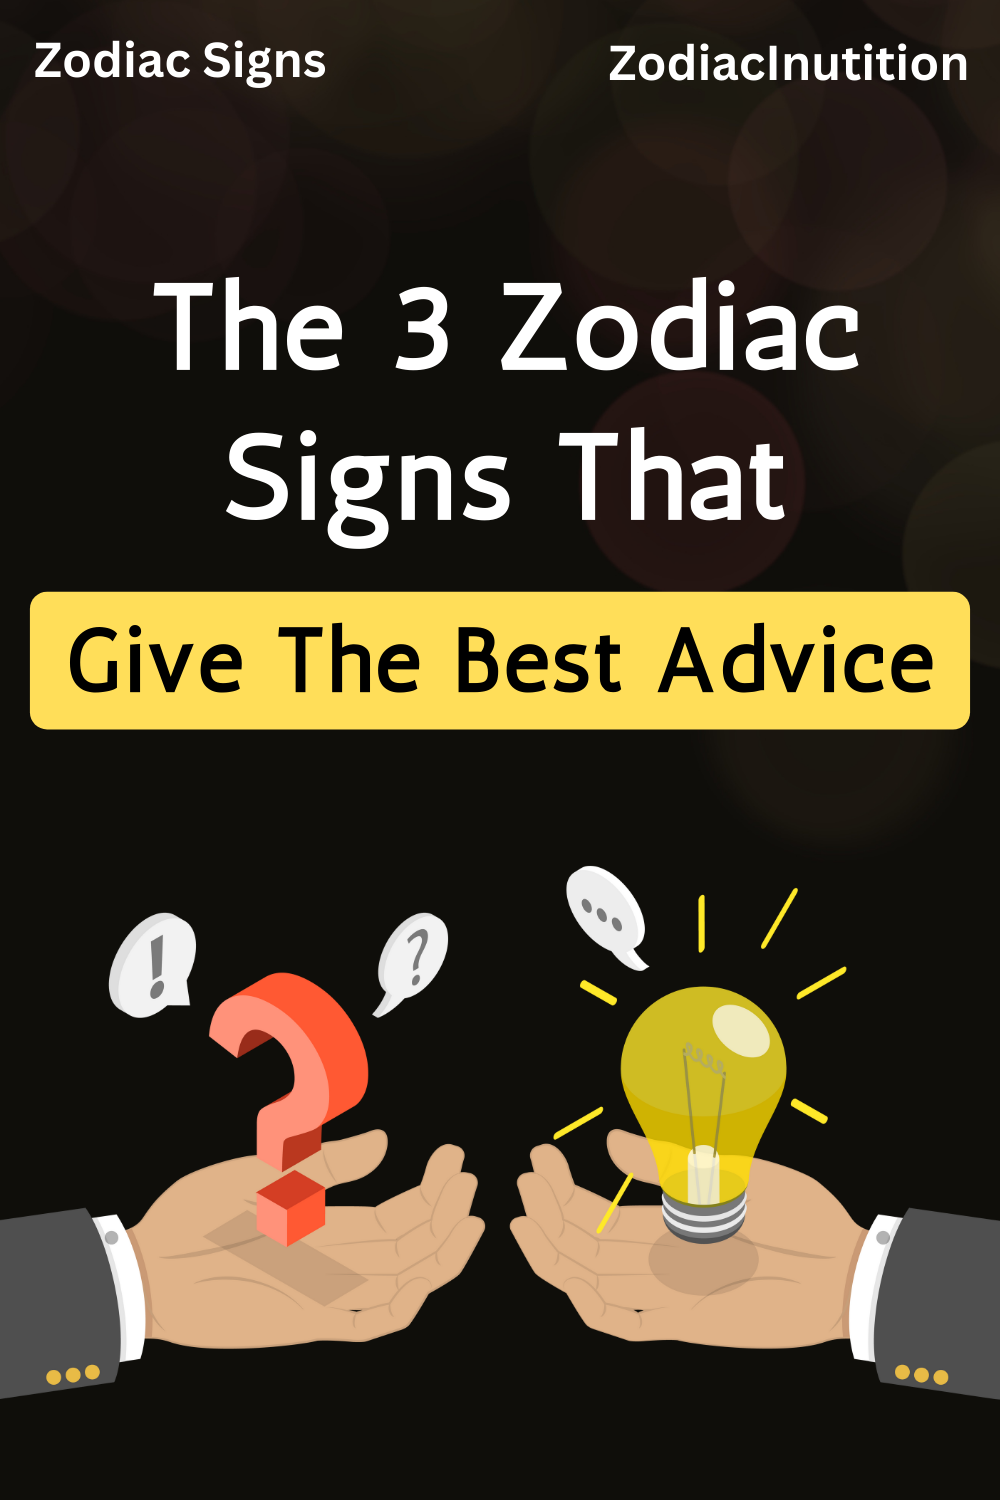 The 3 Zodiac Signs That Give The Best Advice